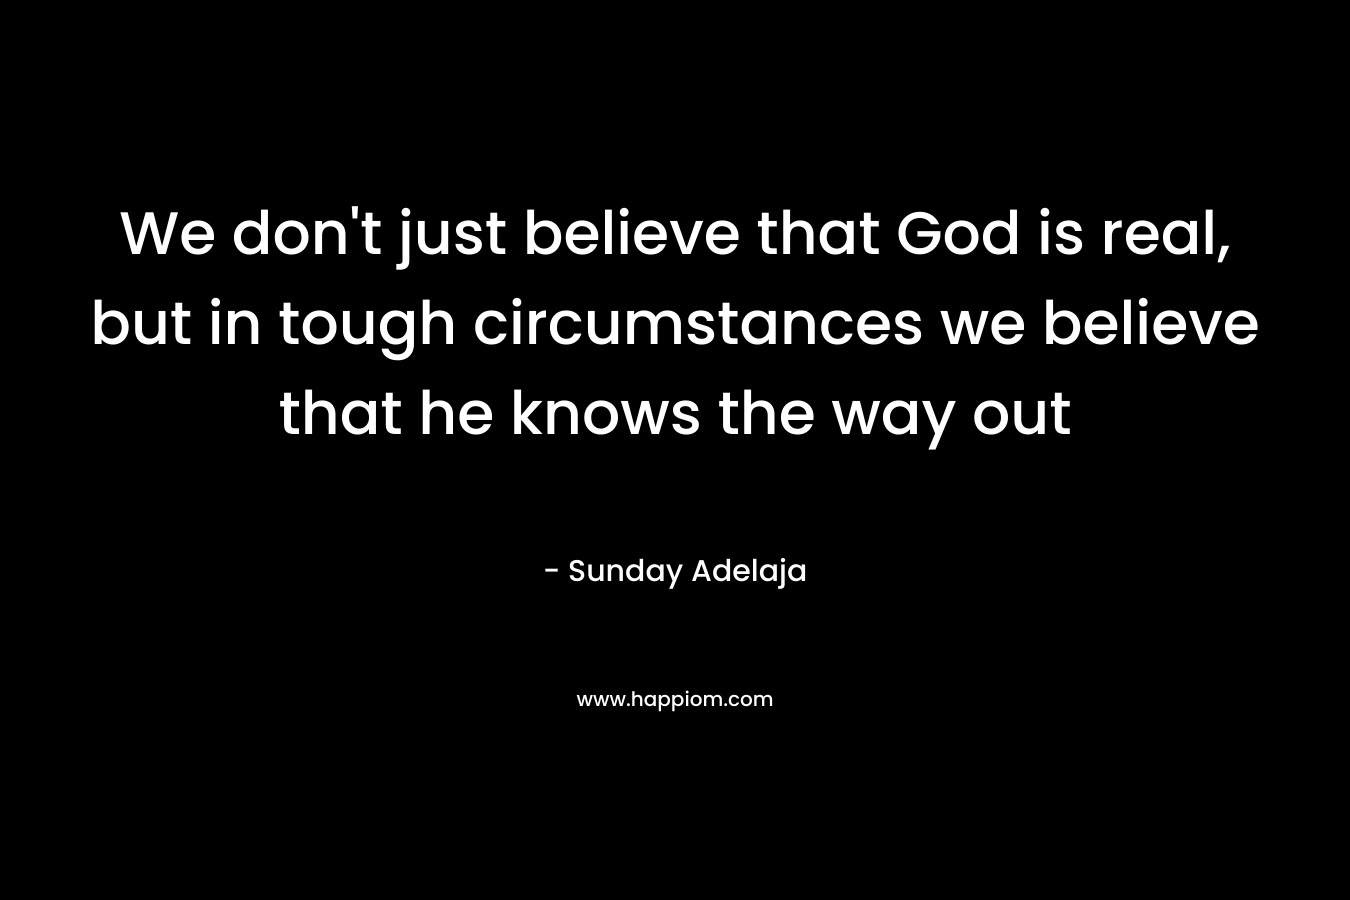 We don't just believe that God is real, but in tough circumstances we believe that he knows the way out